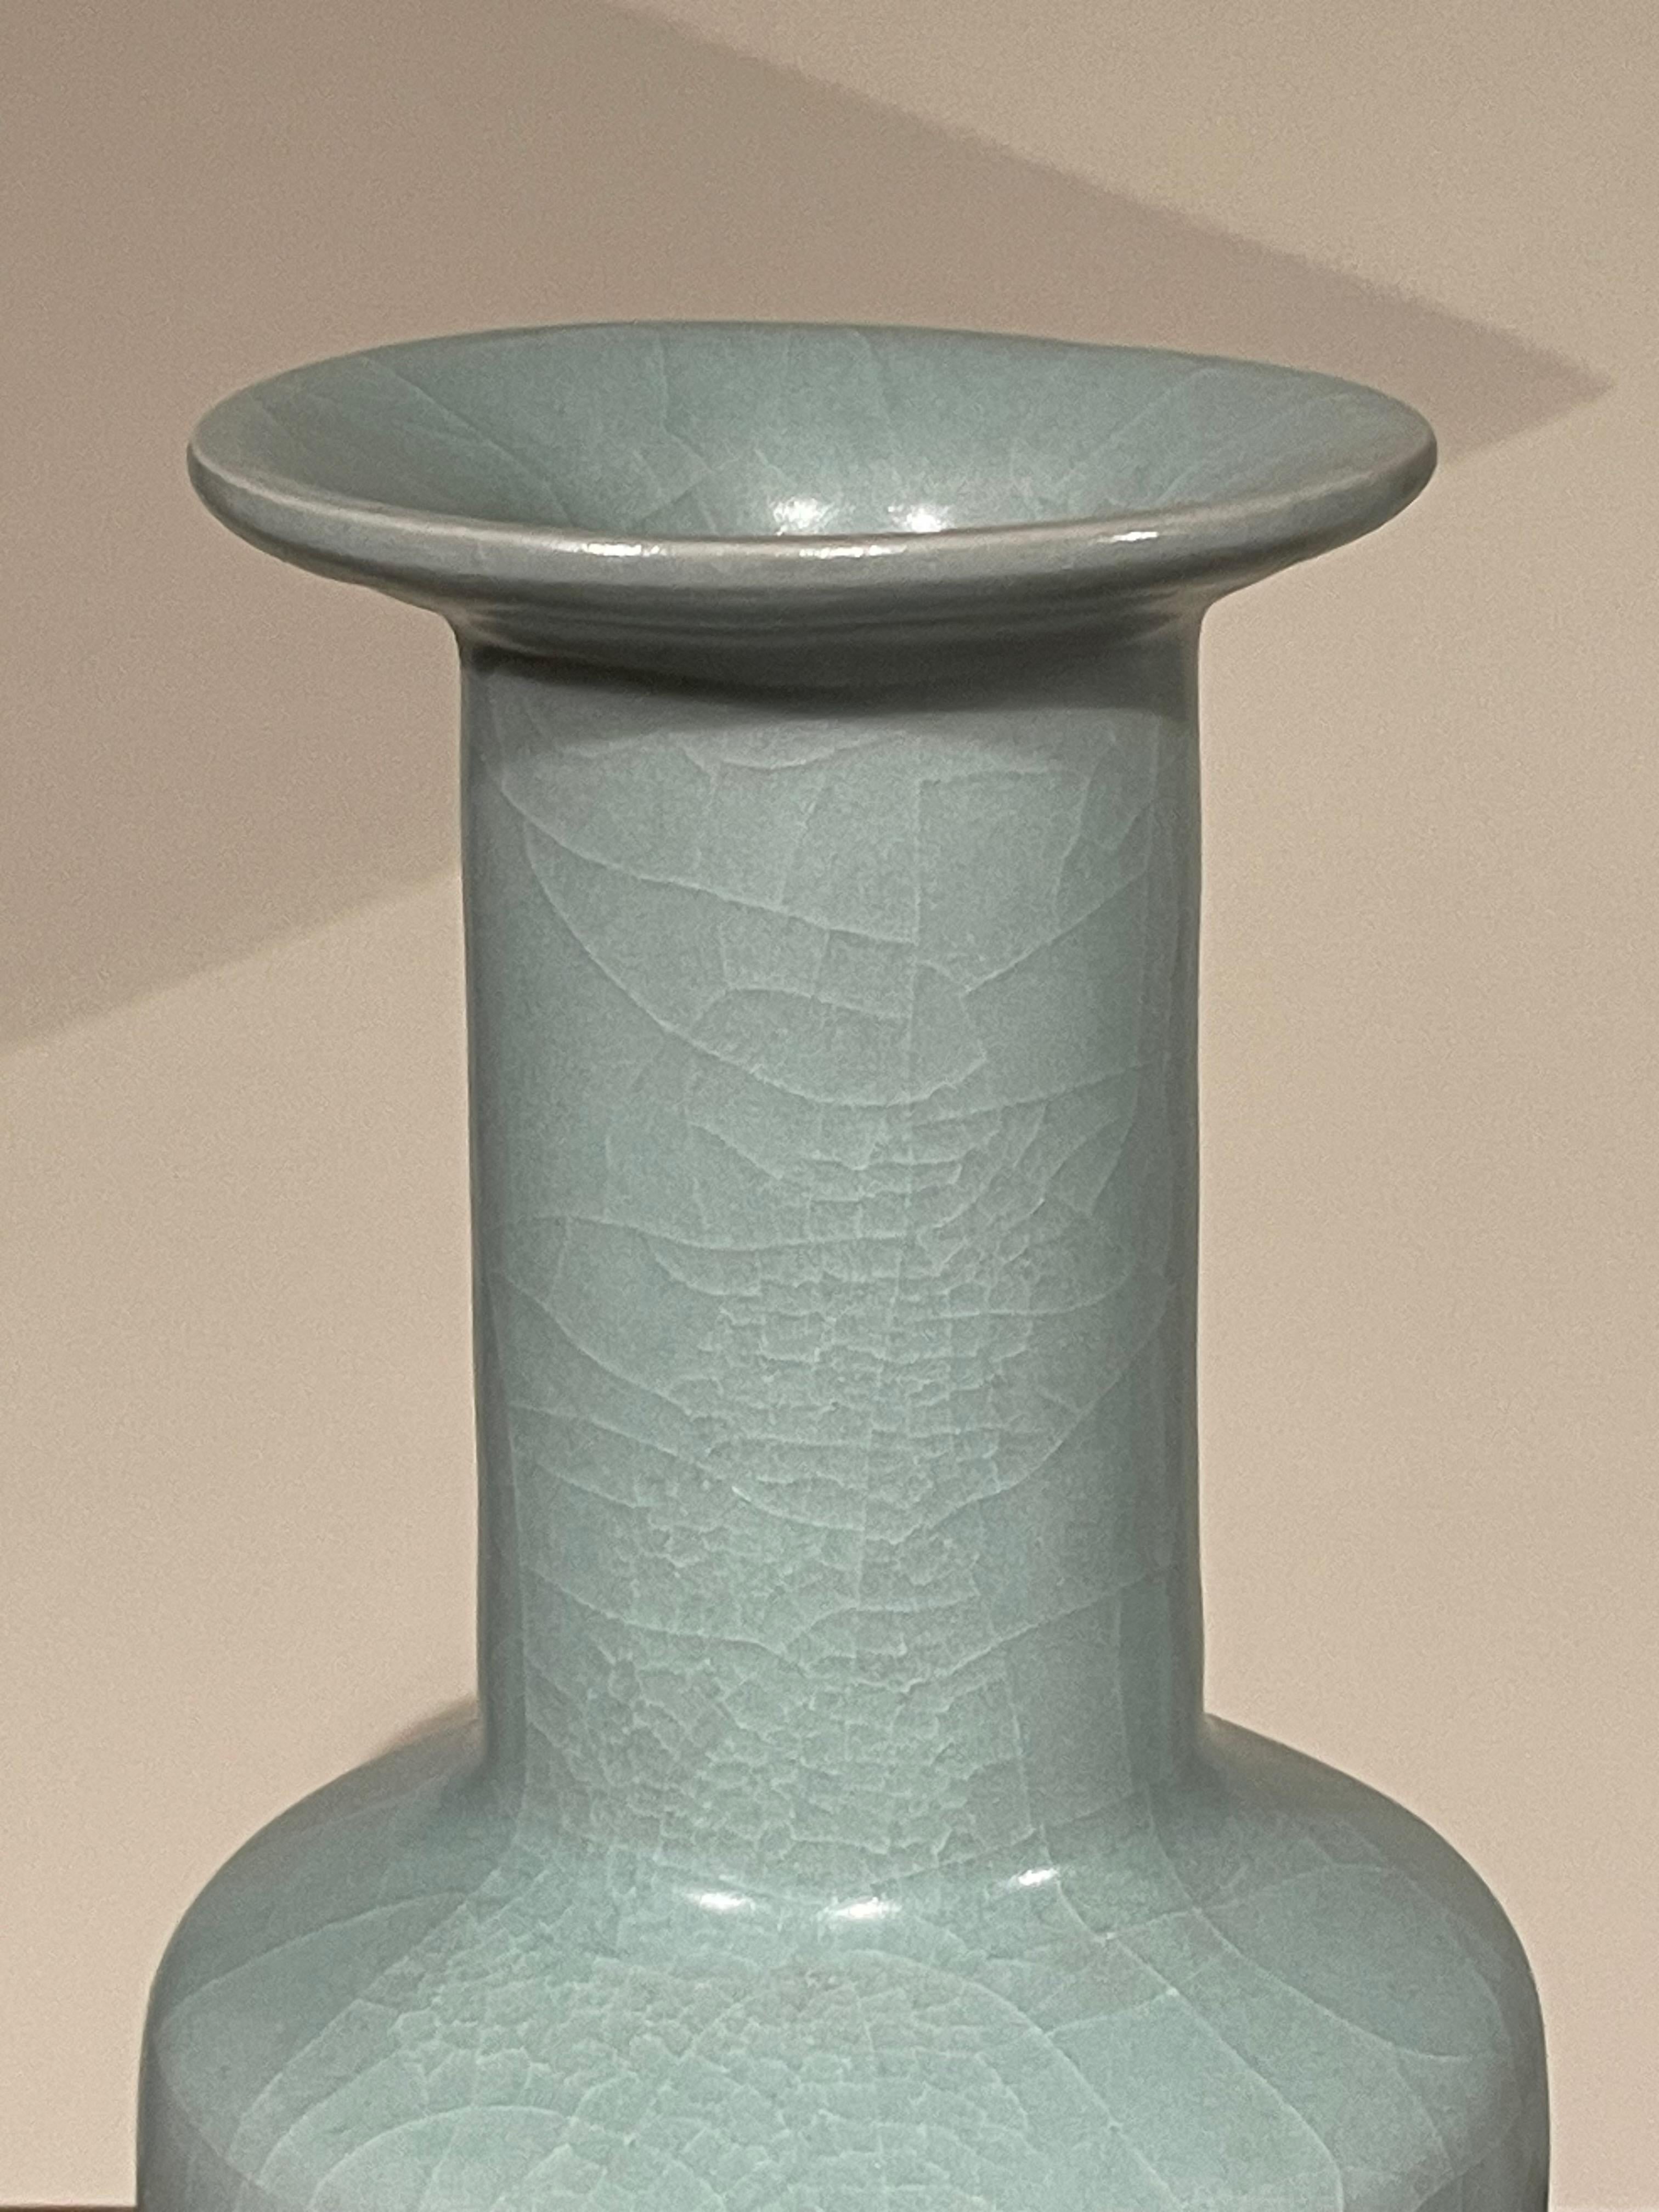 Contemporary Chinese pale turquoise vase.
Cylinder shaped bottom.
Large collection available with varying sizes and shapes.
